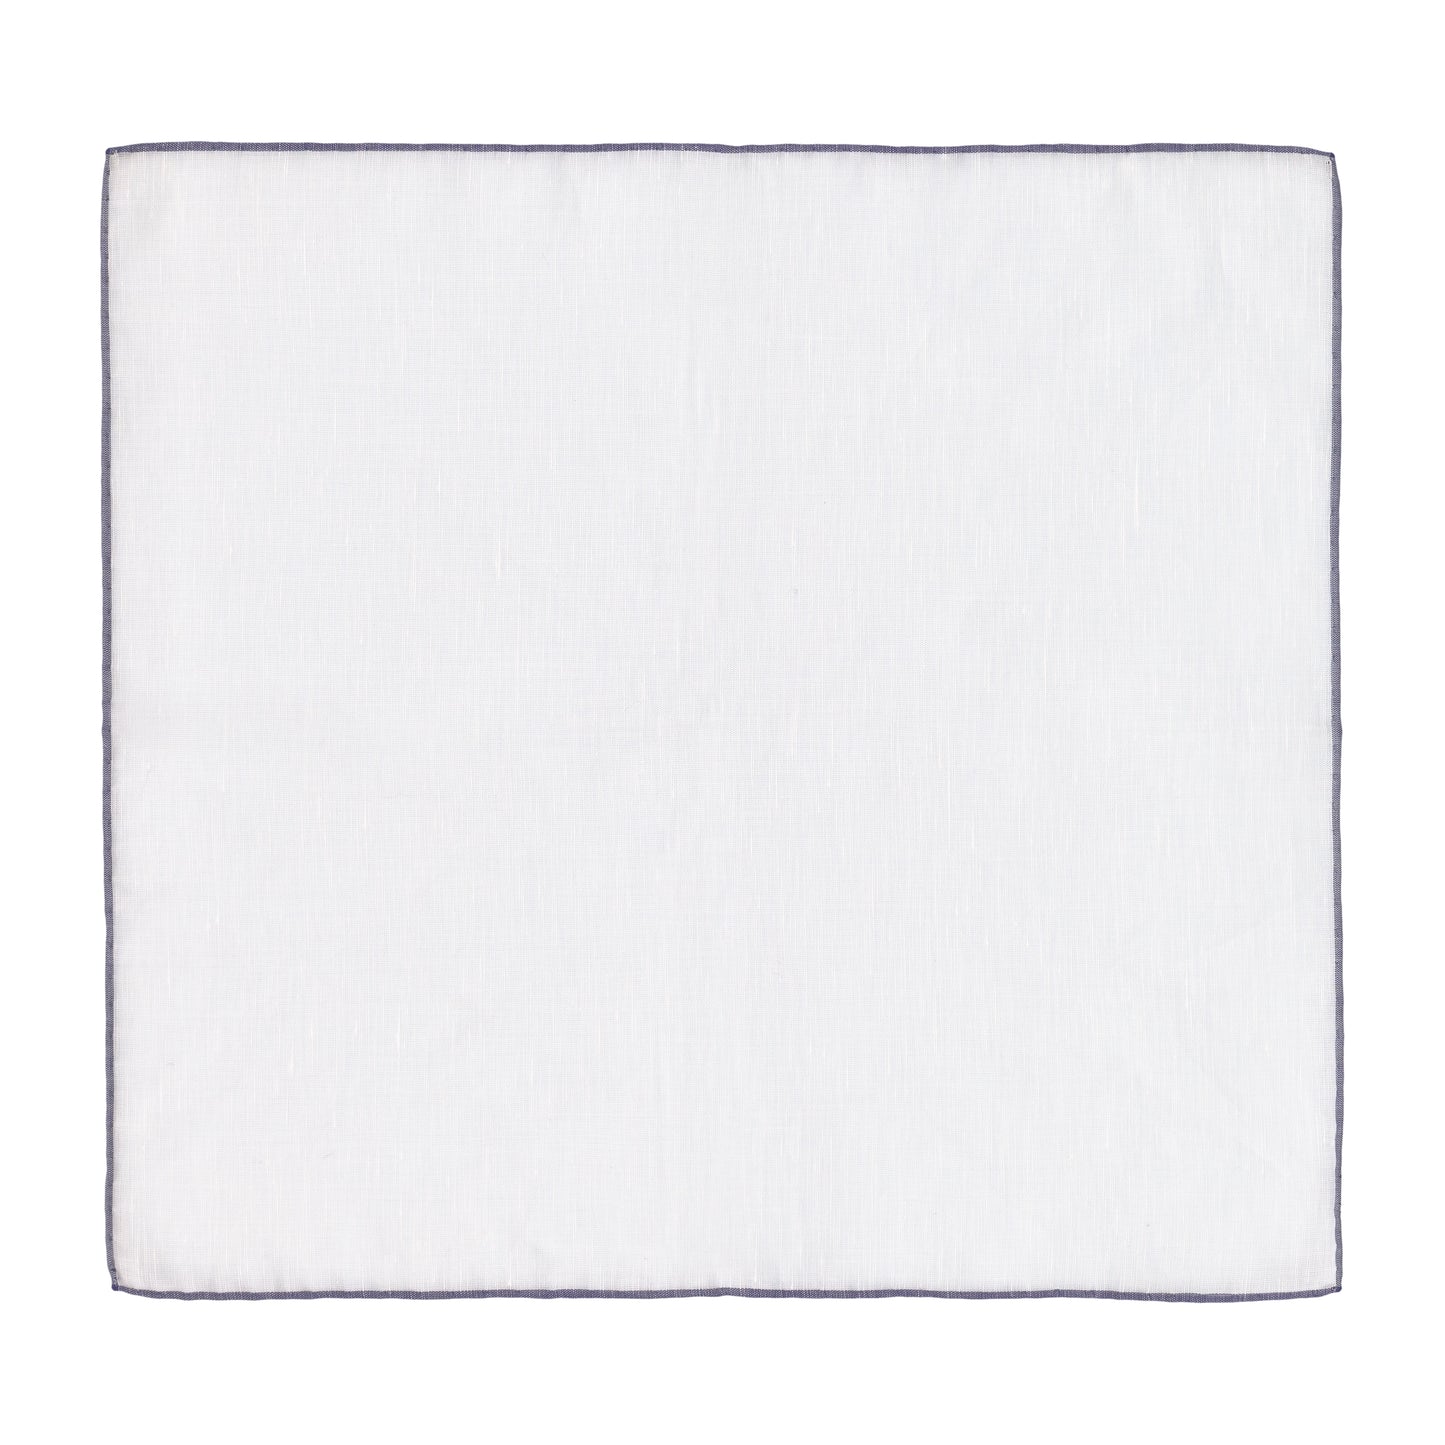 Cotton-Linen Pocket Square in Off White and Navy Blue